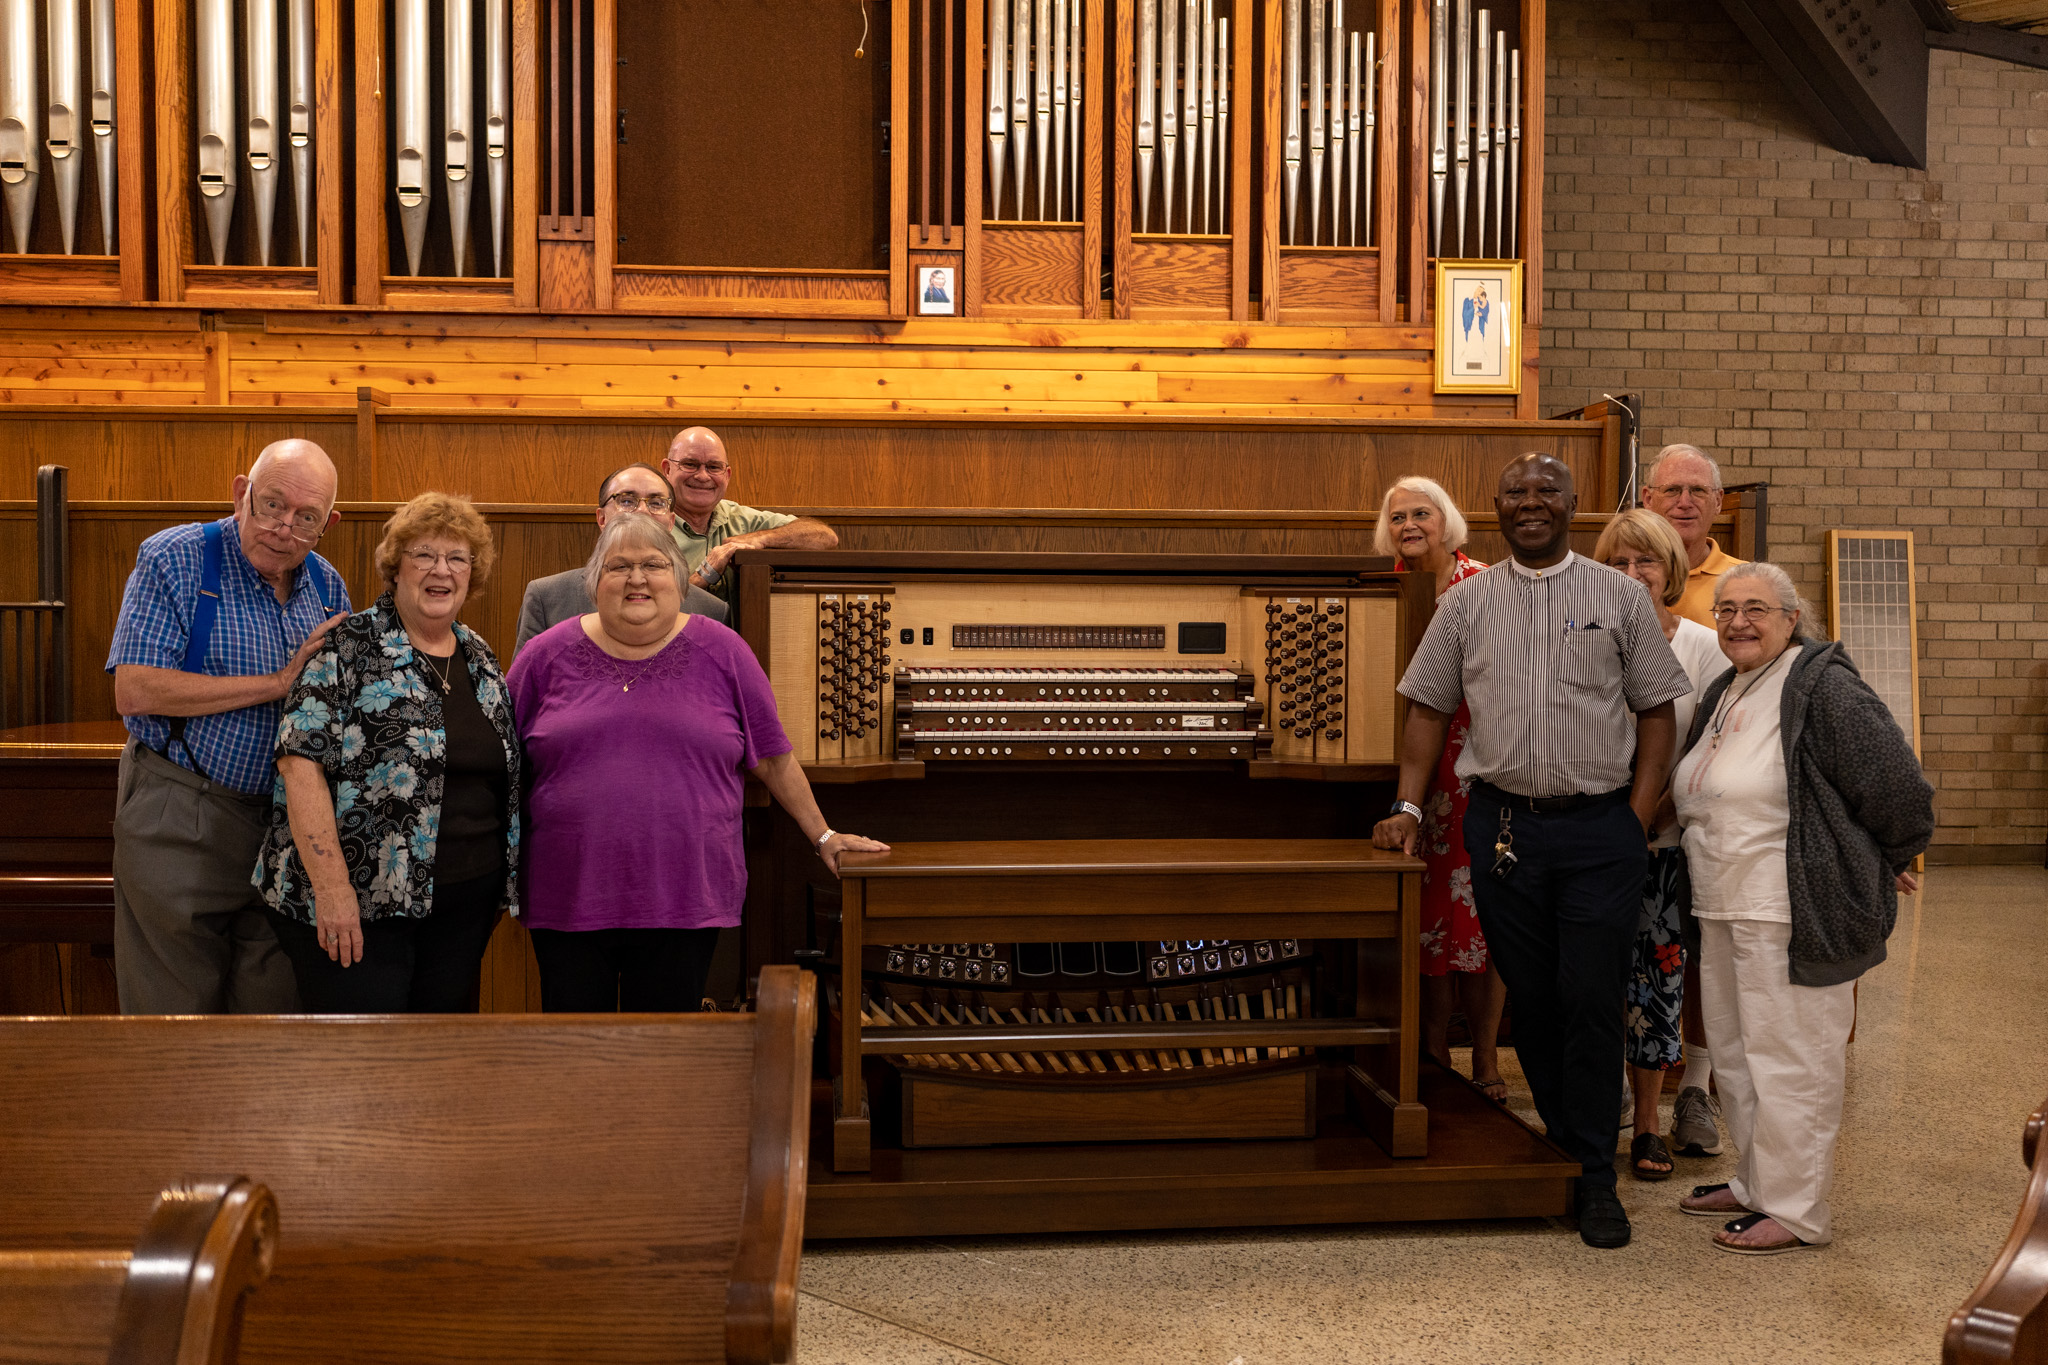 Father Patrick and the other people present together with the new organ